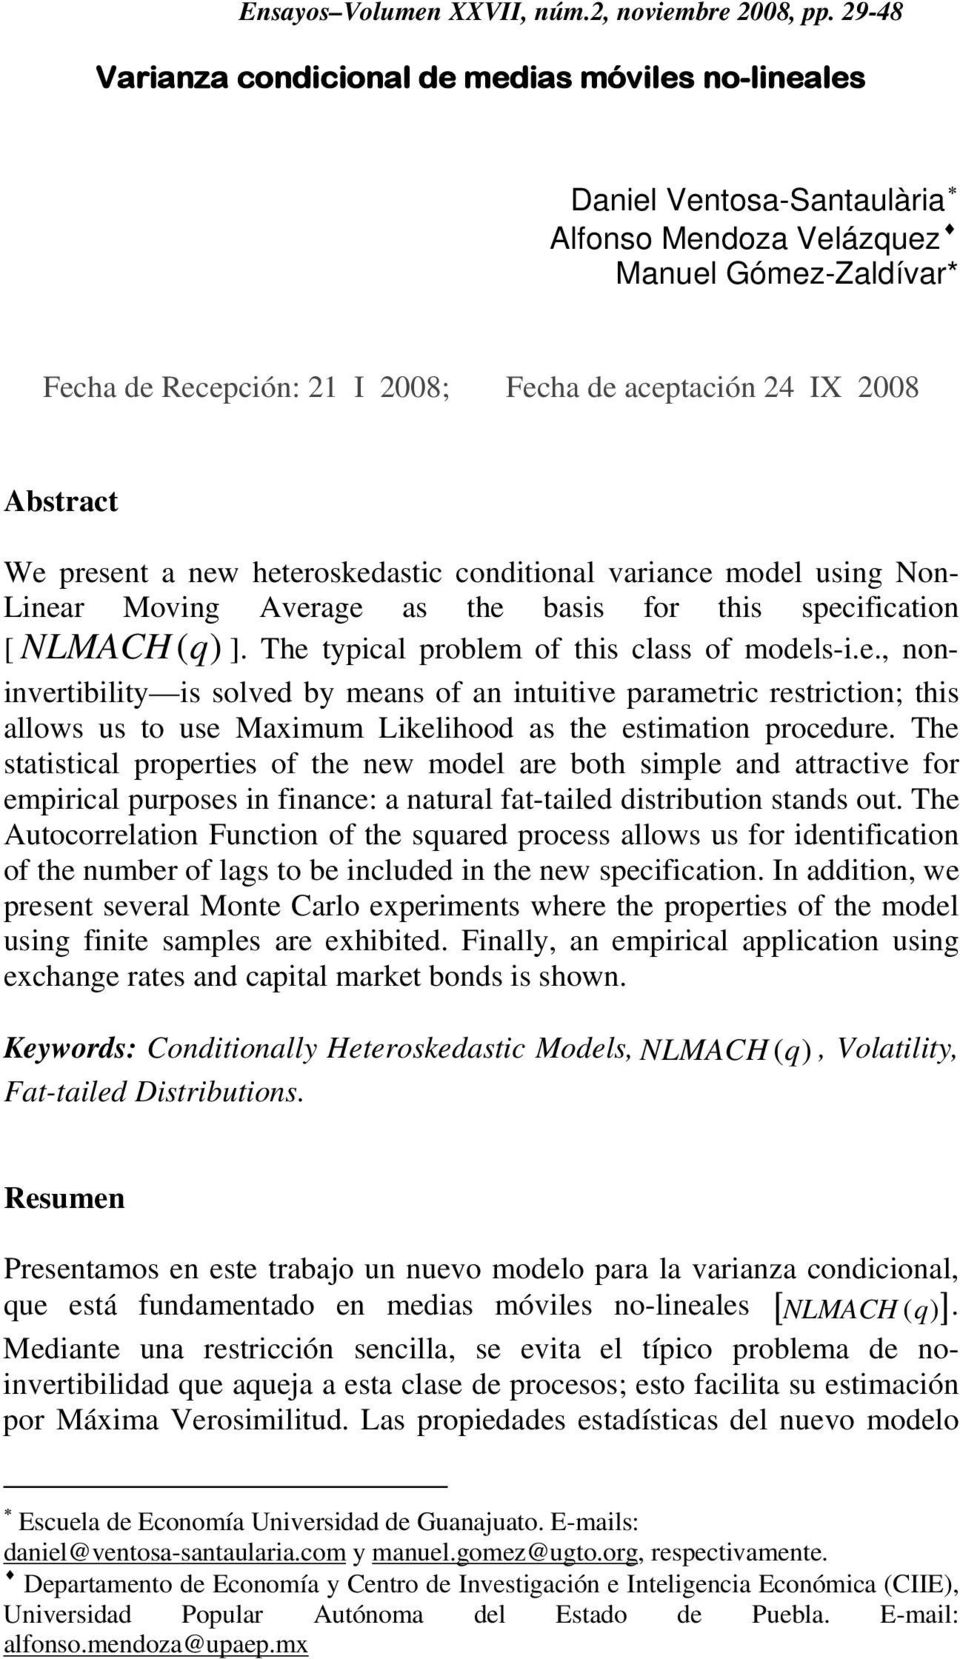 new heeroskedasic coiional variance model using Non- Linear Moving Average as he basis for his specificaion [ NLMACH ( ) ]. The ypical problem of his class of models-i.e., noninveribiliy is solved by means of an inuiive parameric resricion; his allows us o use Maximum Likelihood as he esimaion procedure.